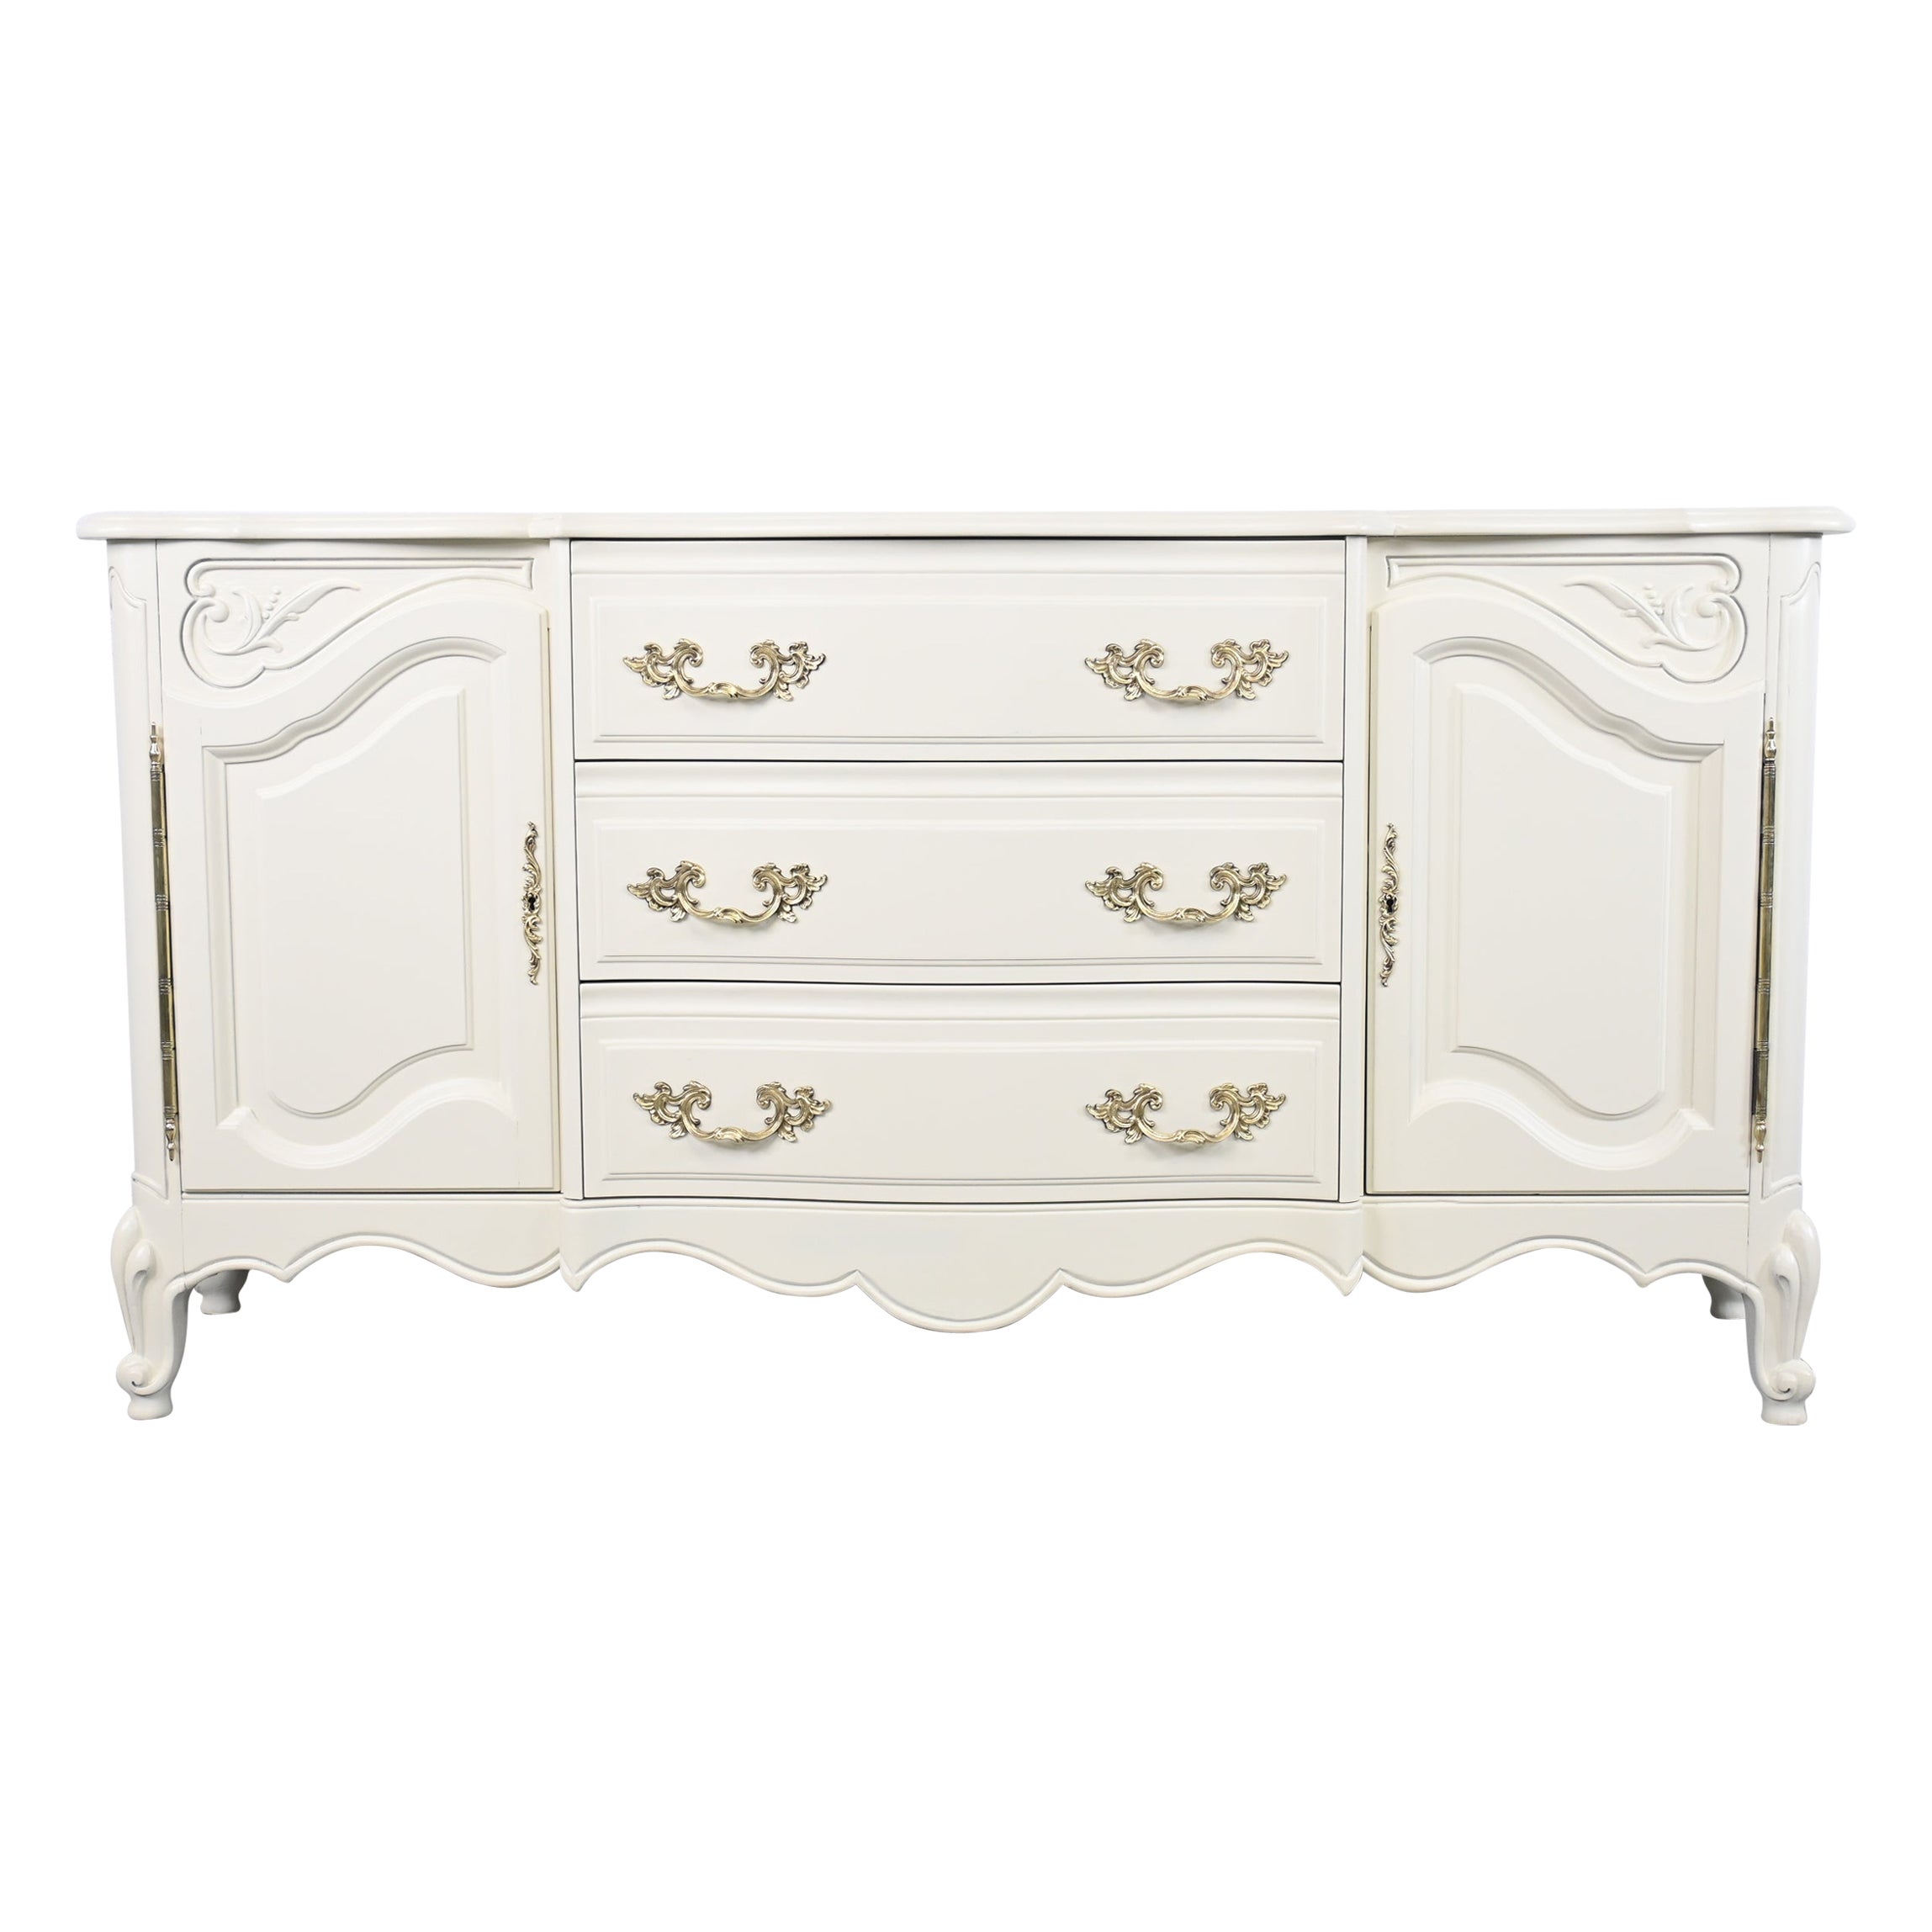 Karges Furniture Louis XV French Provincial Credenza or Sideboard For Sale